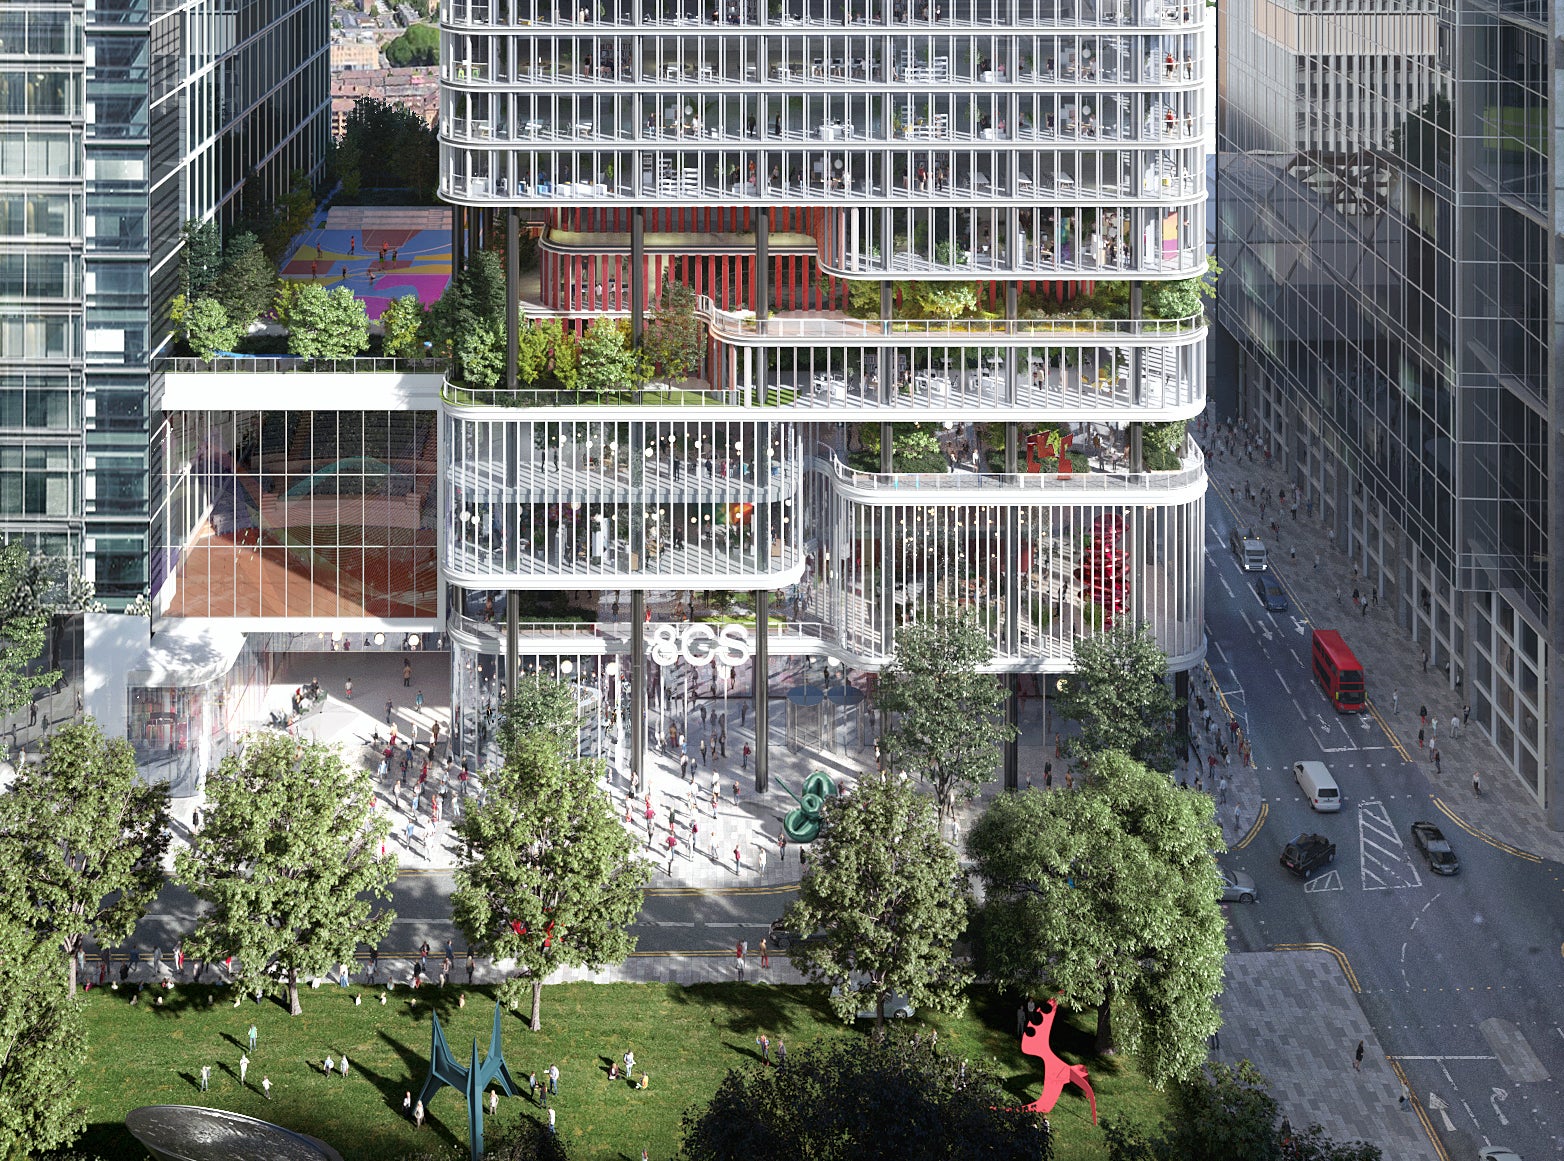 The project would be the largest ever conversion of an office skyscraper to become a ‘mixed use’ building